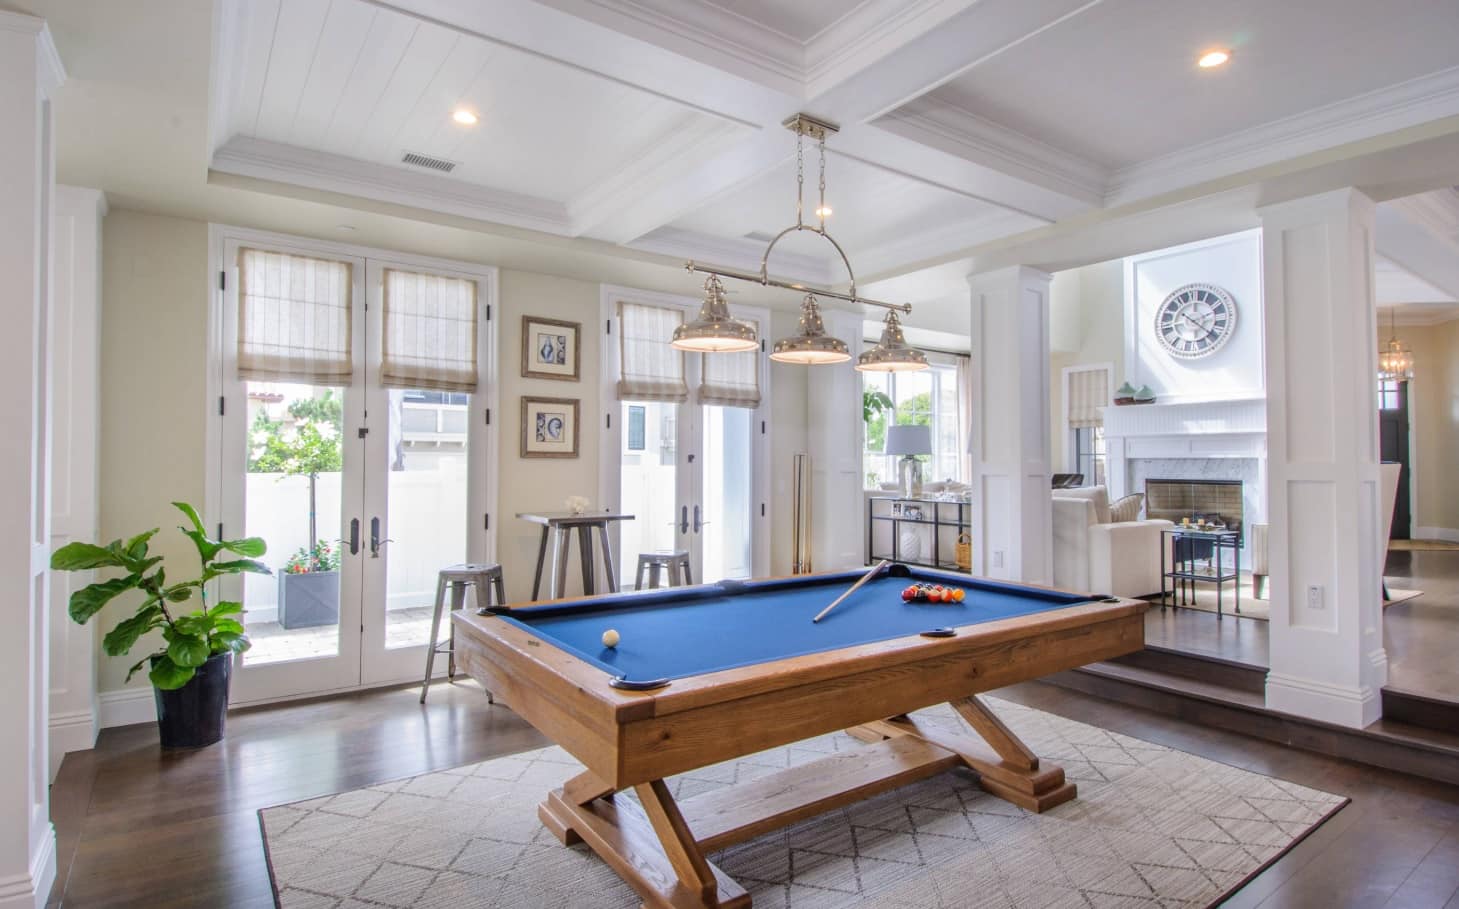 Sport room with billiards table and large cell coffered ceiling